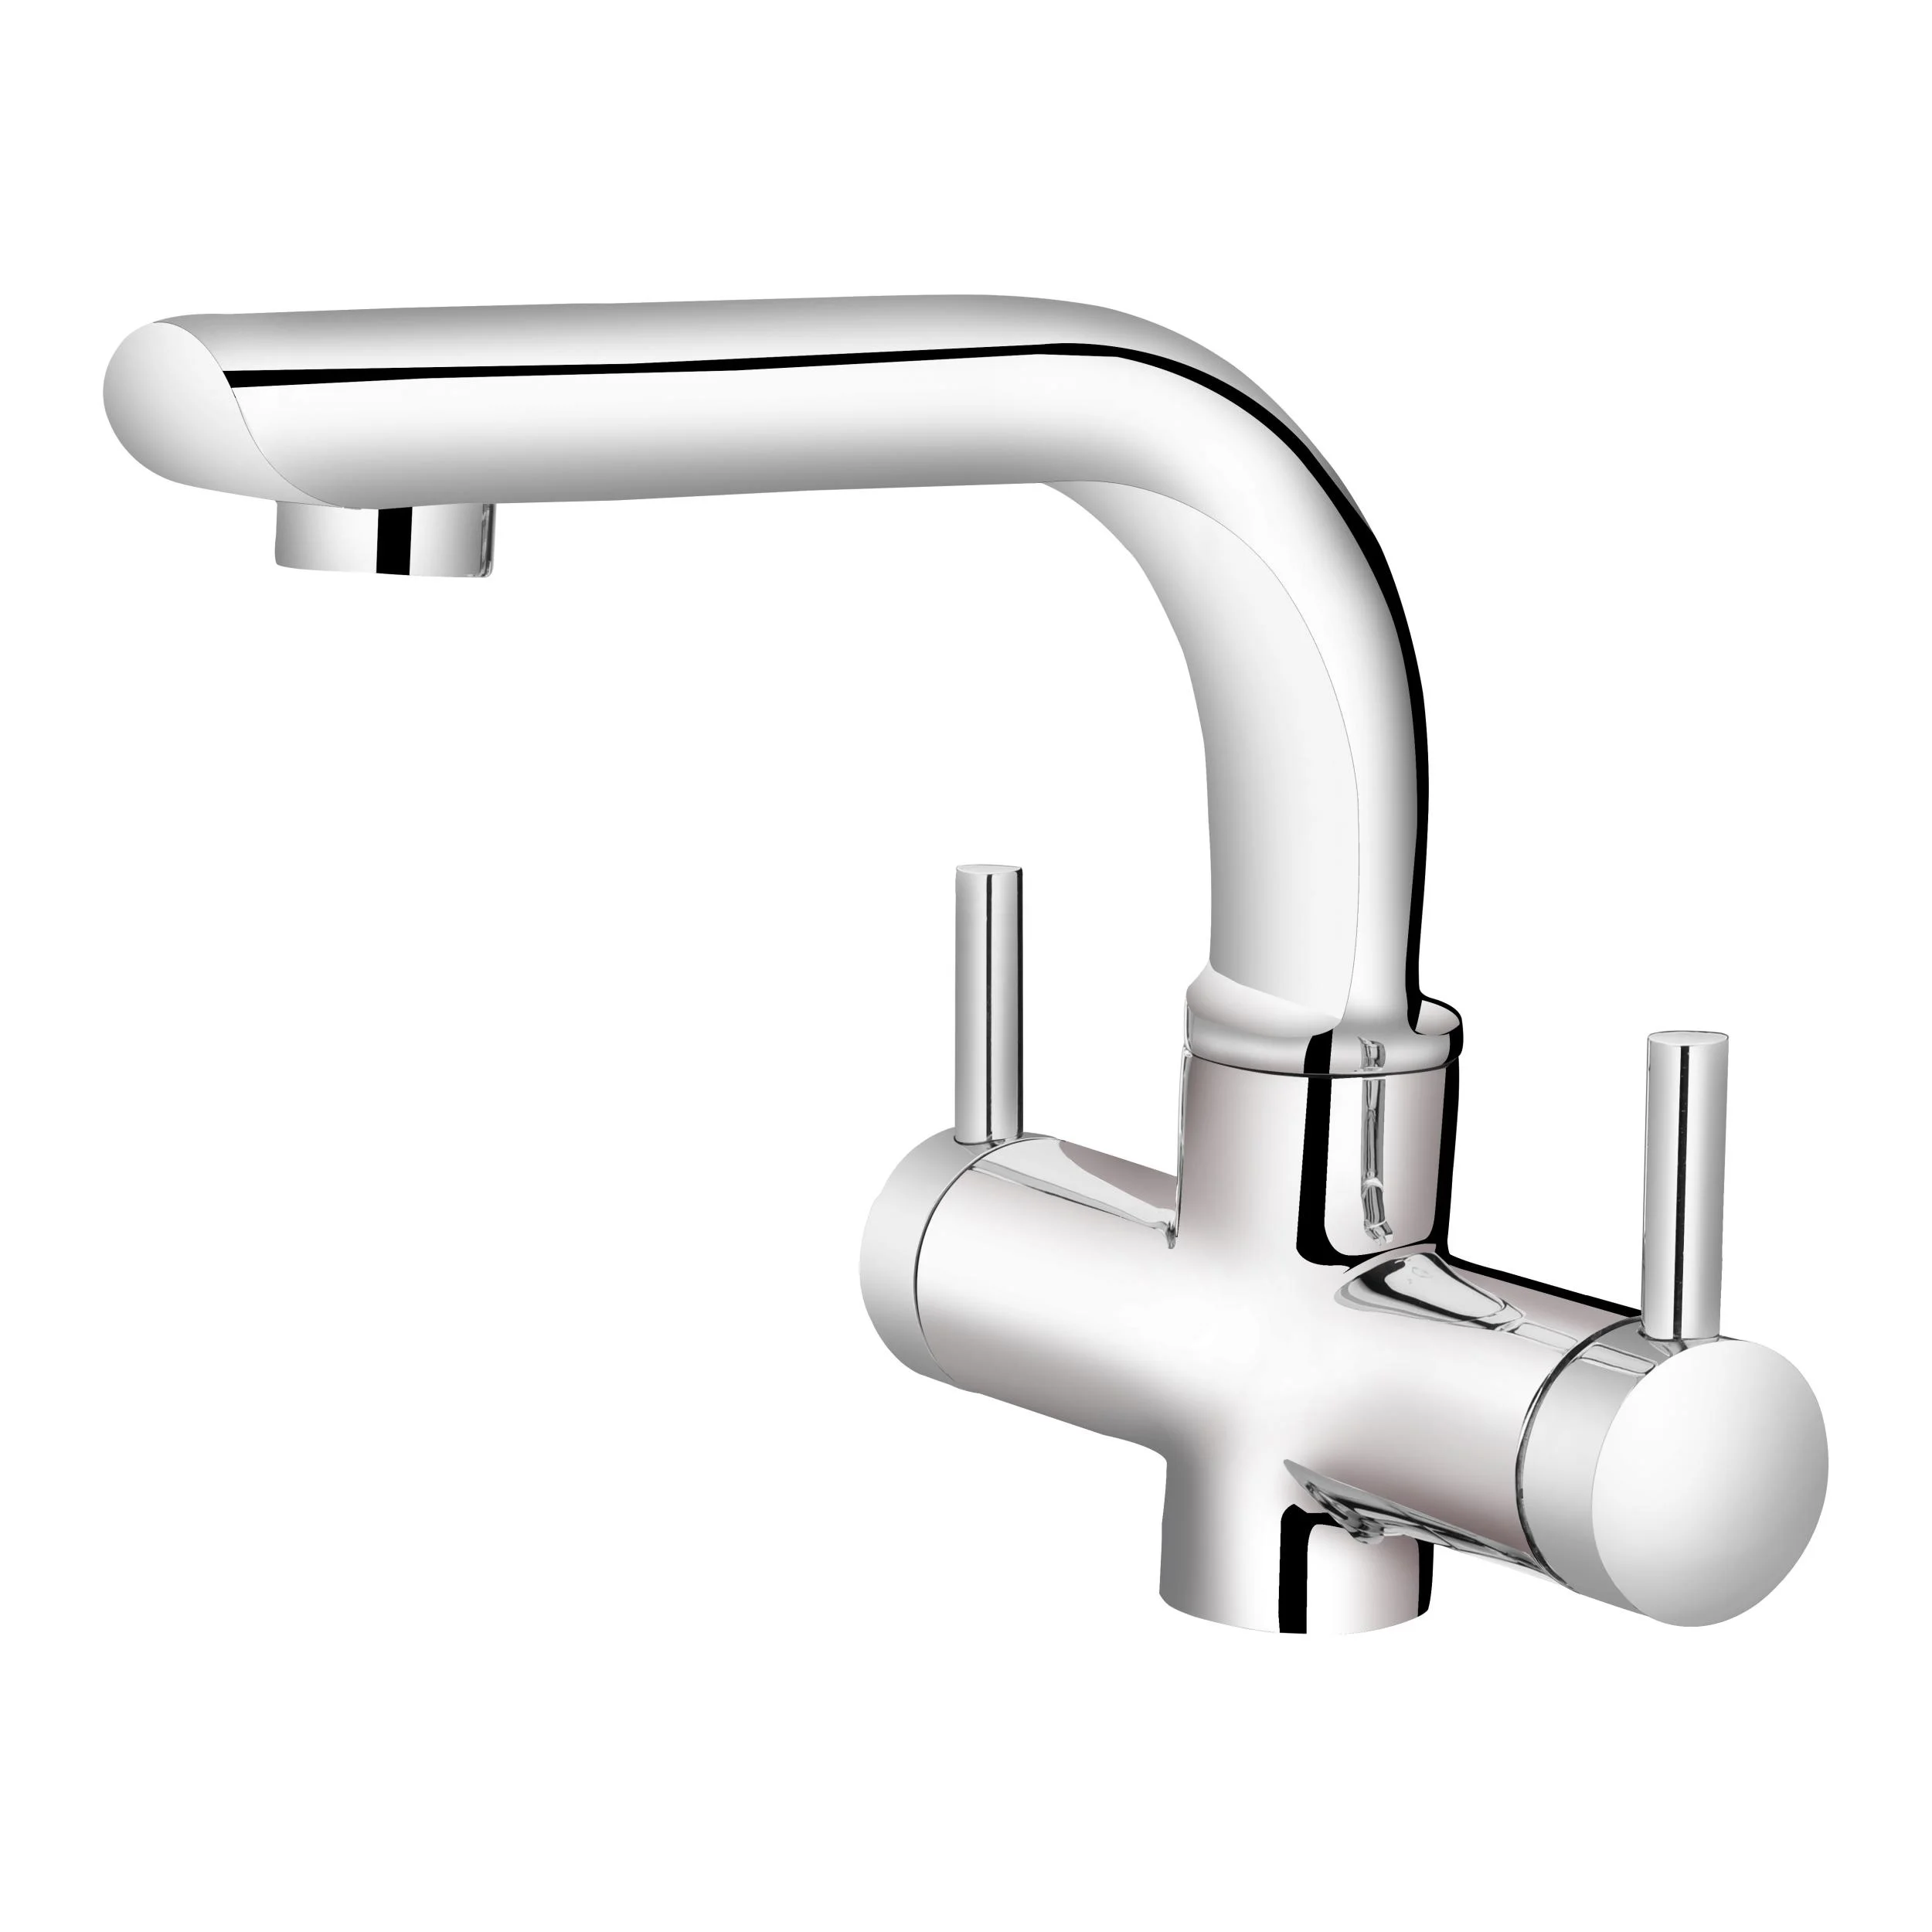 Bathroom Multi function Wall Mounted Long Neck Double Switch Faucet With Ceramic Faucet Cartridge